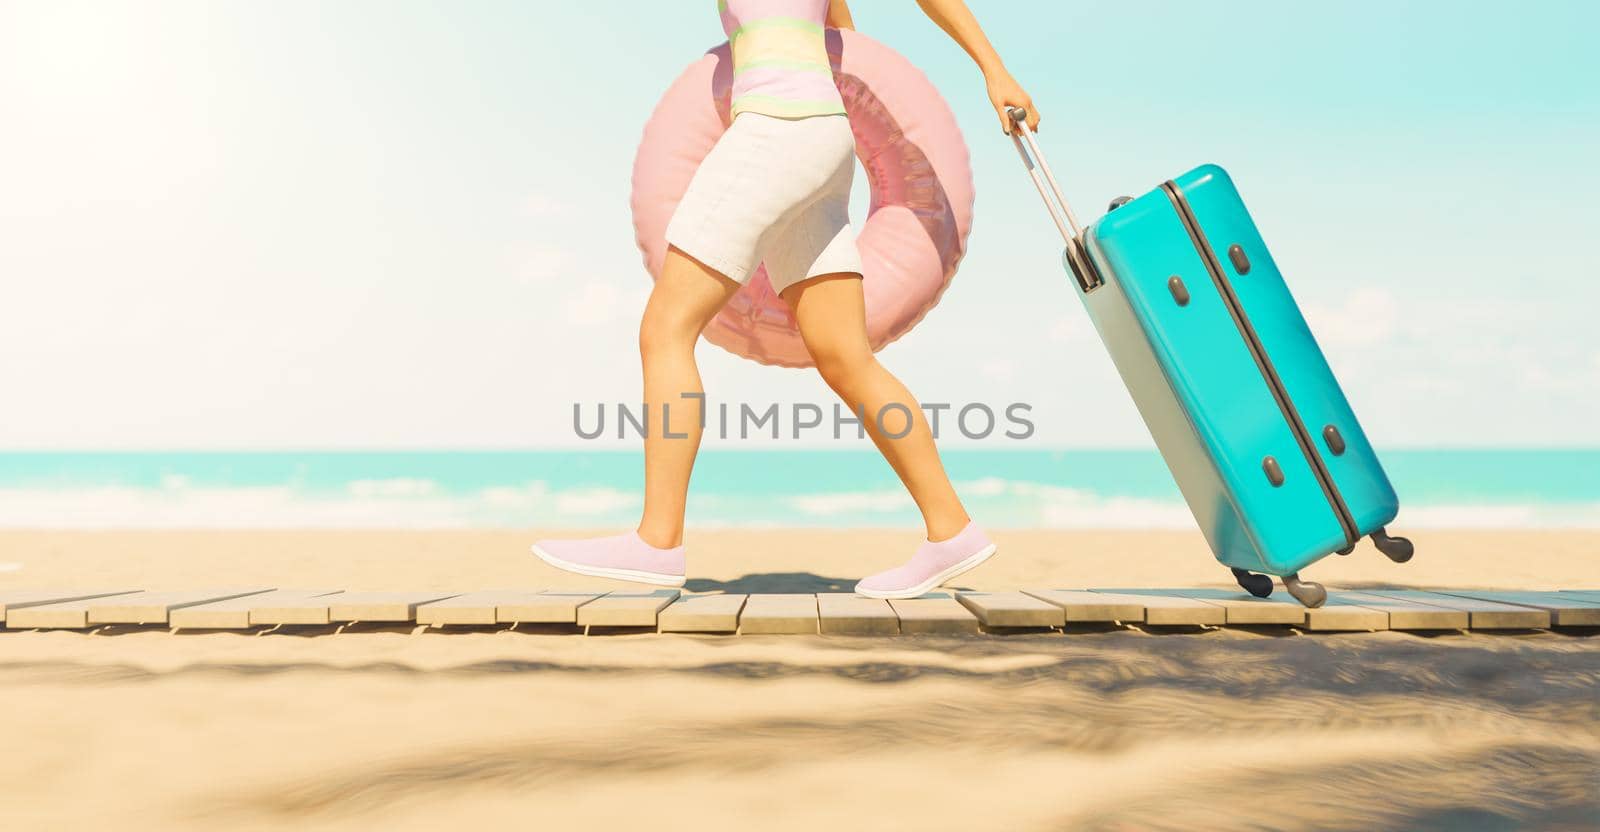 woman walking on wooden path on the beach with suitcase and float. summer background. vacation concept. 3d render